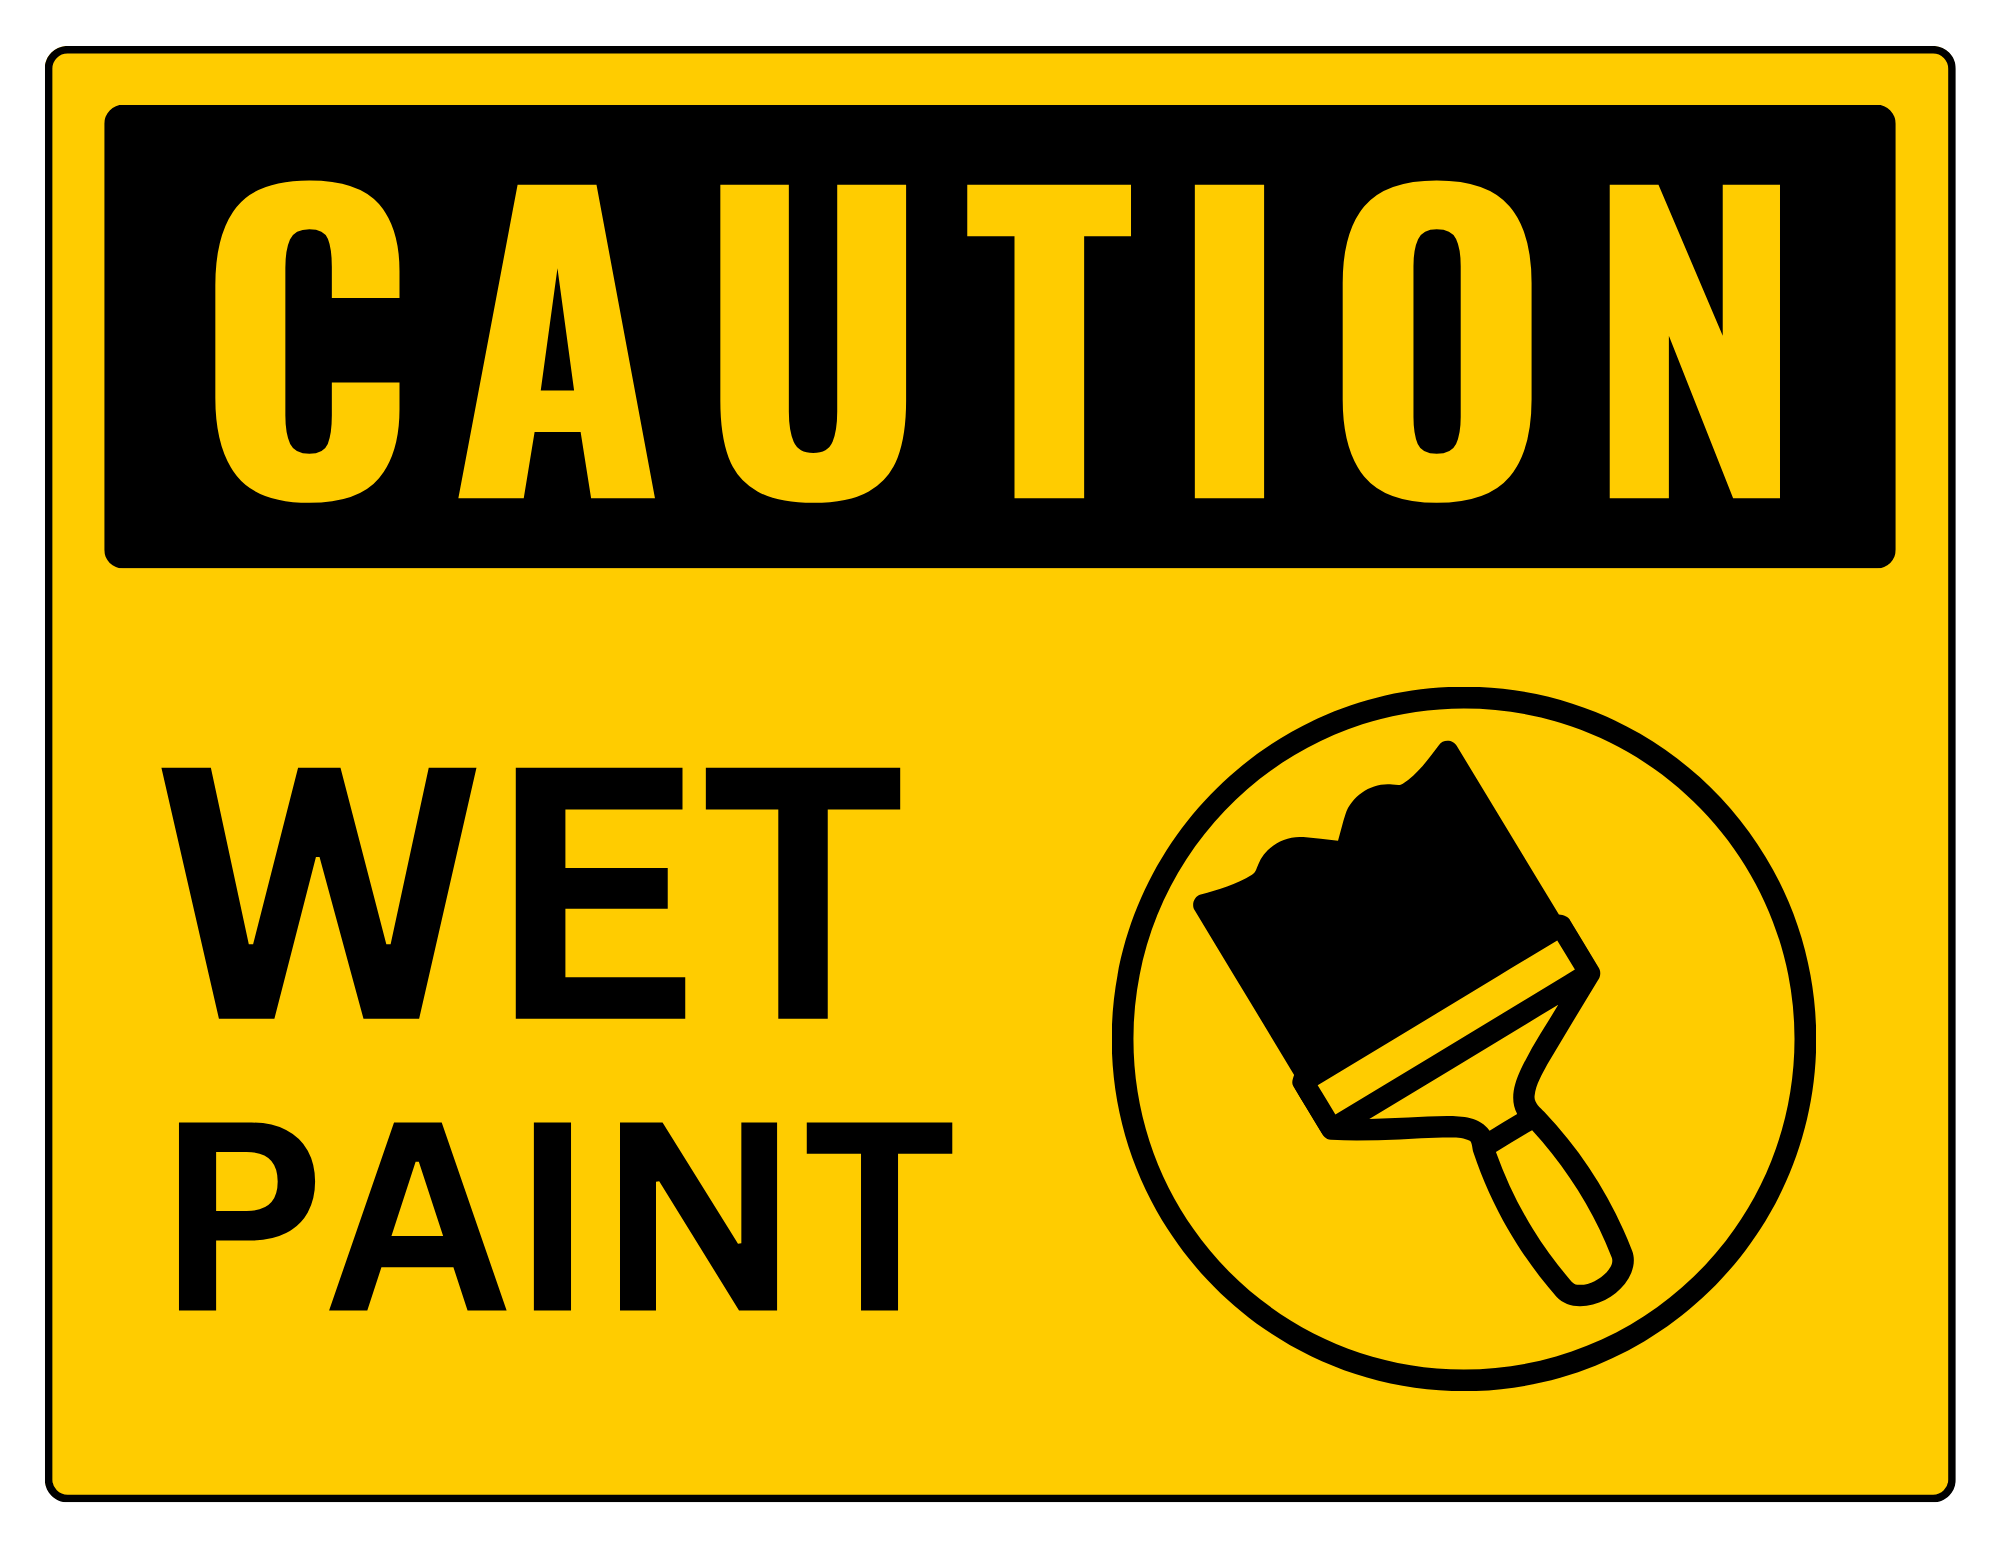 wet-paint-sign-printable-templates-free-pdf-downloads